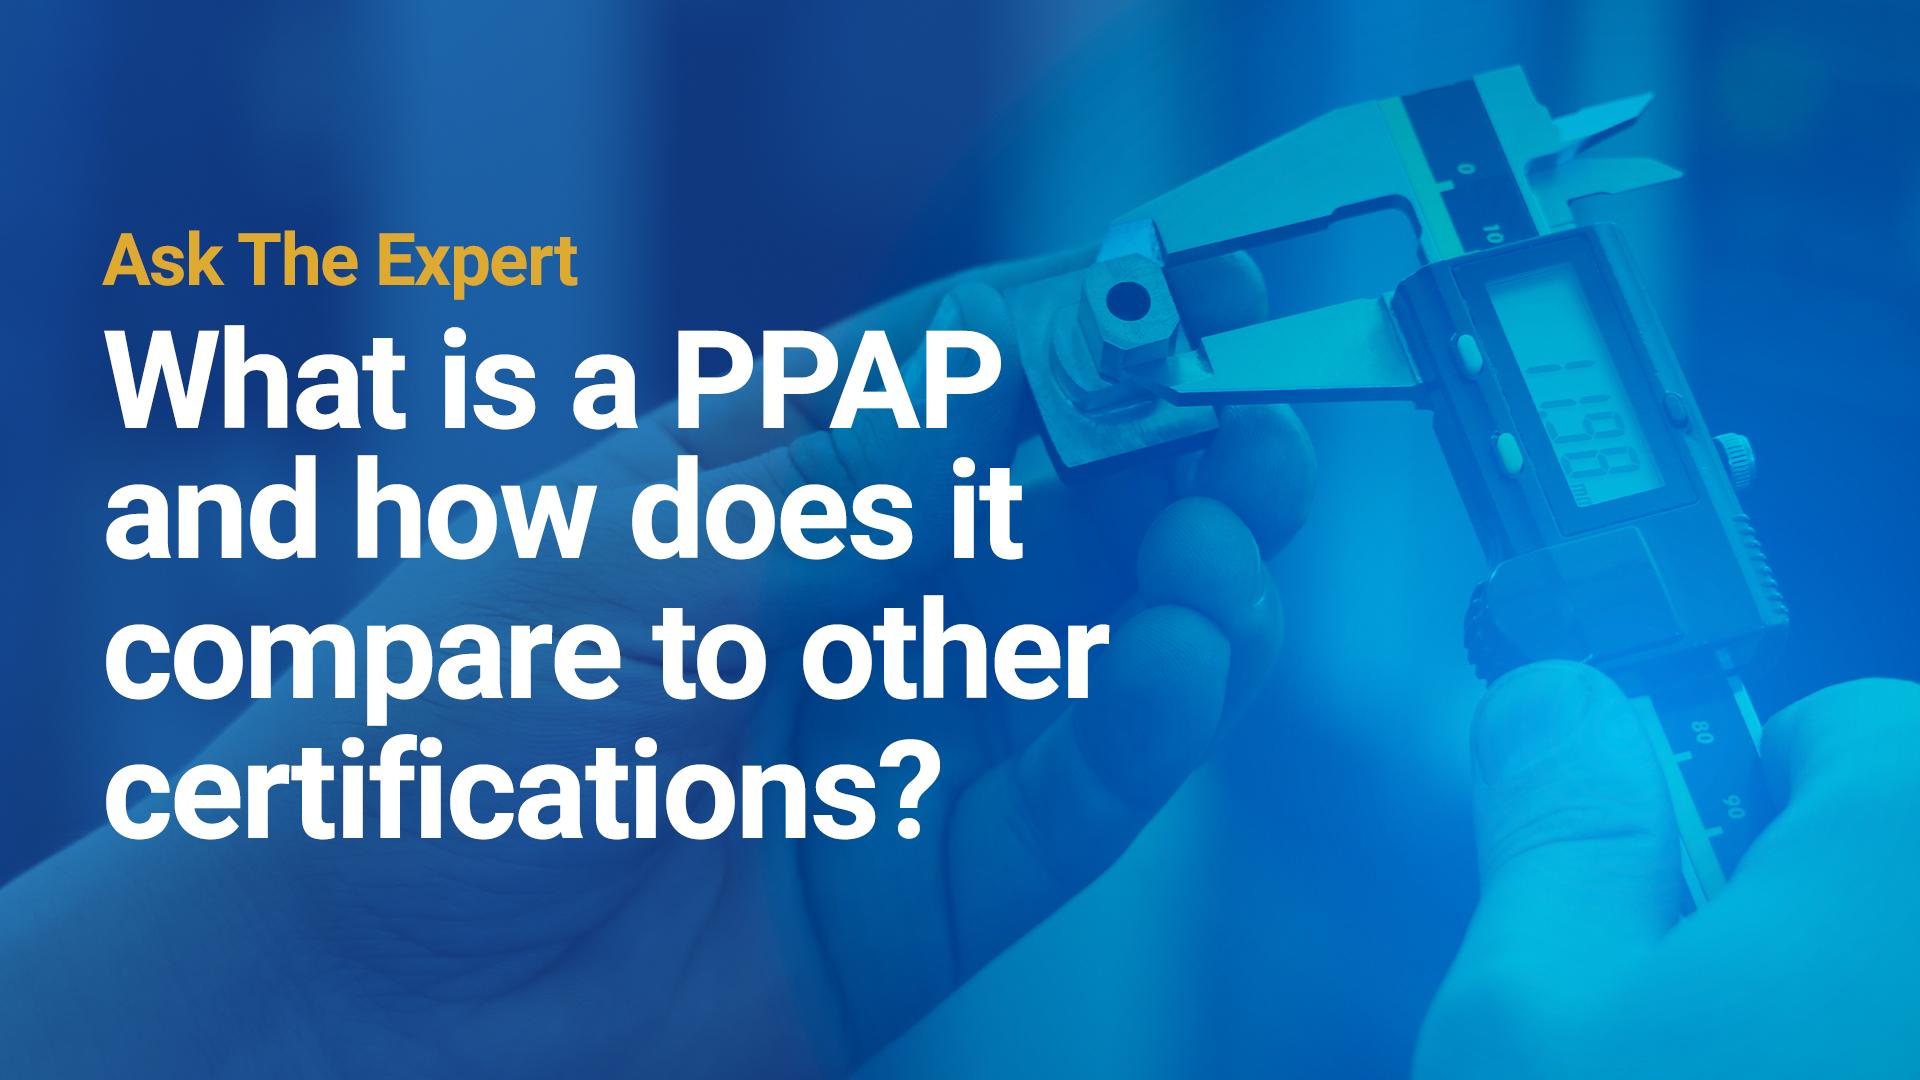 What is a PPAP and how does it compare to other certifications?